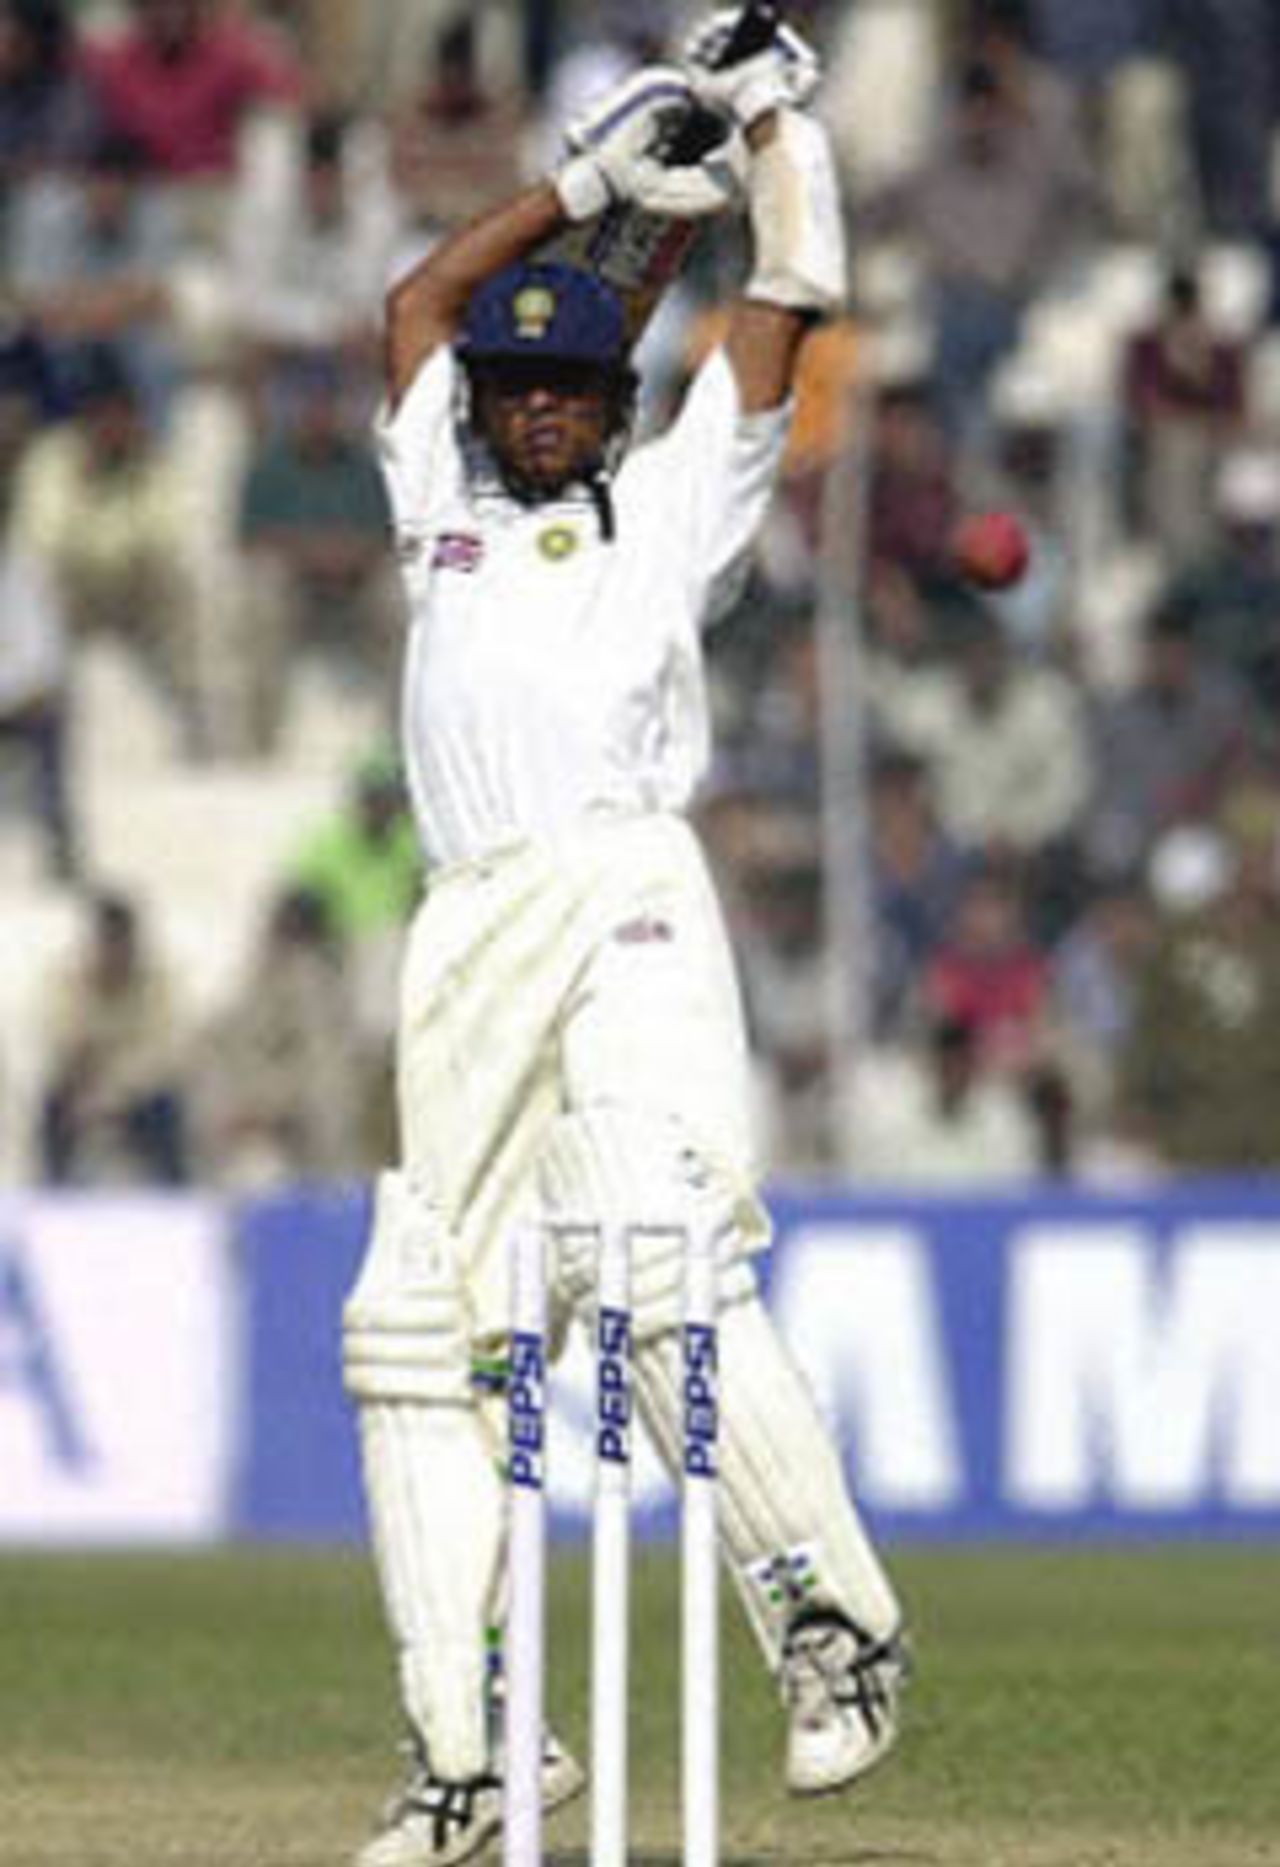 SS Das lets the ball go behind him on way his to his first half century in Tests, Zimbabwe in India, 2000/01, 1st Test, India v Zimbabwe, Feroz Shah Kotla, Delhi, 18-22 November 2000 (Day 3).